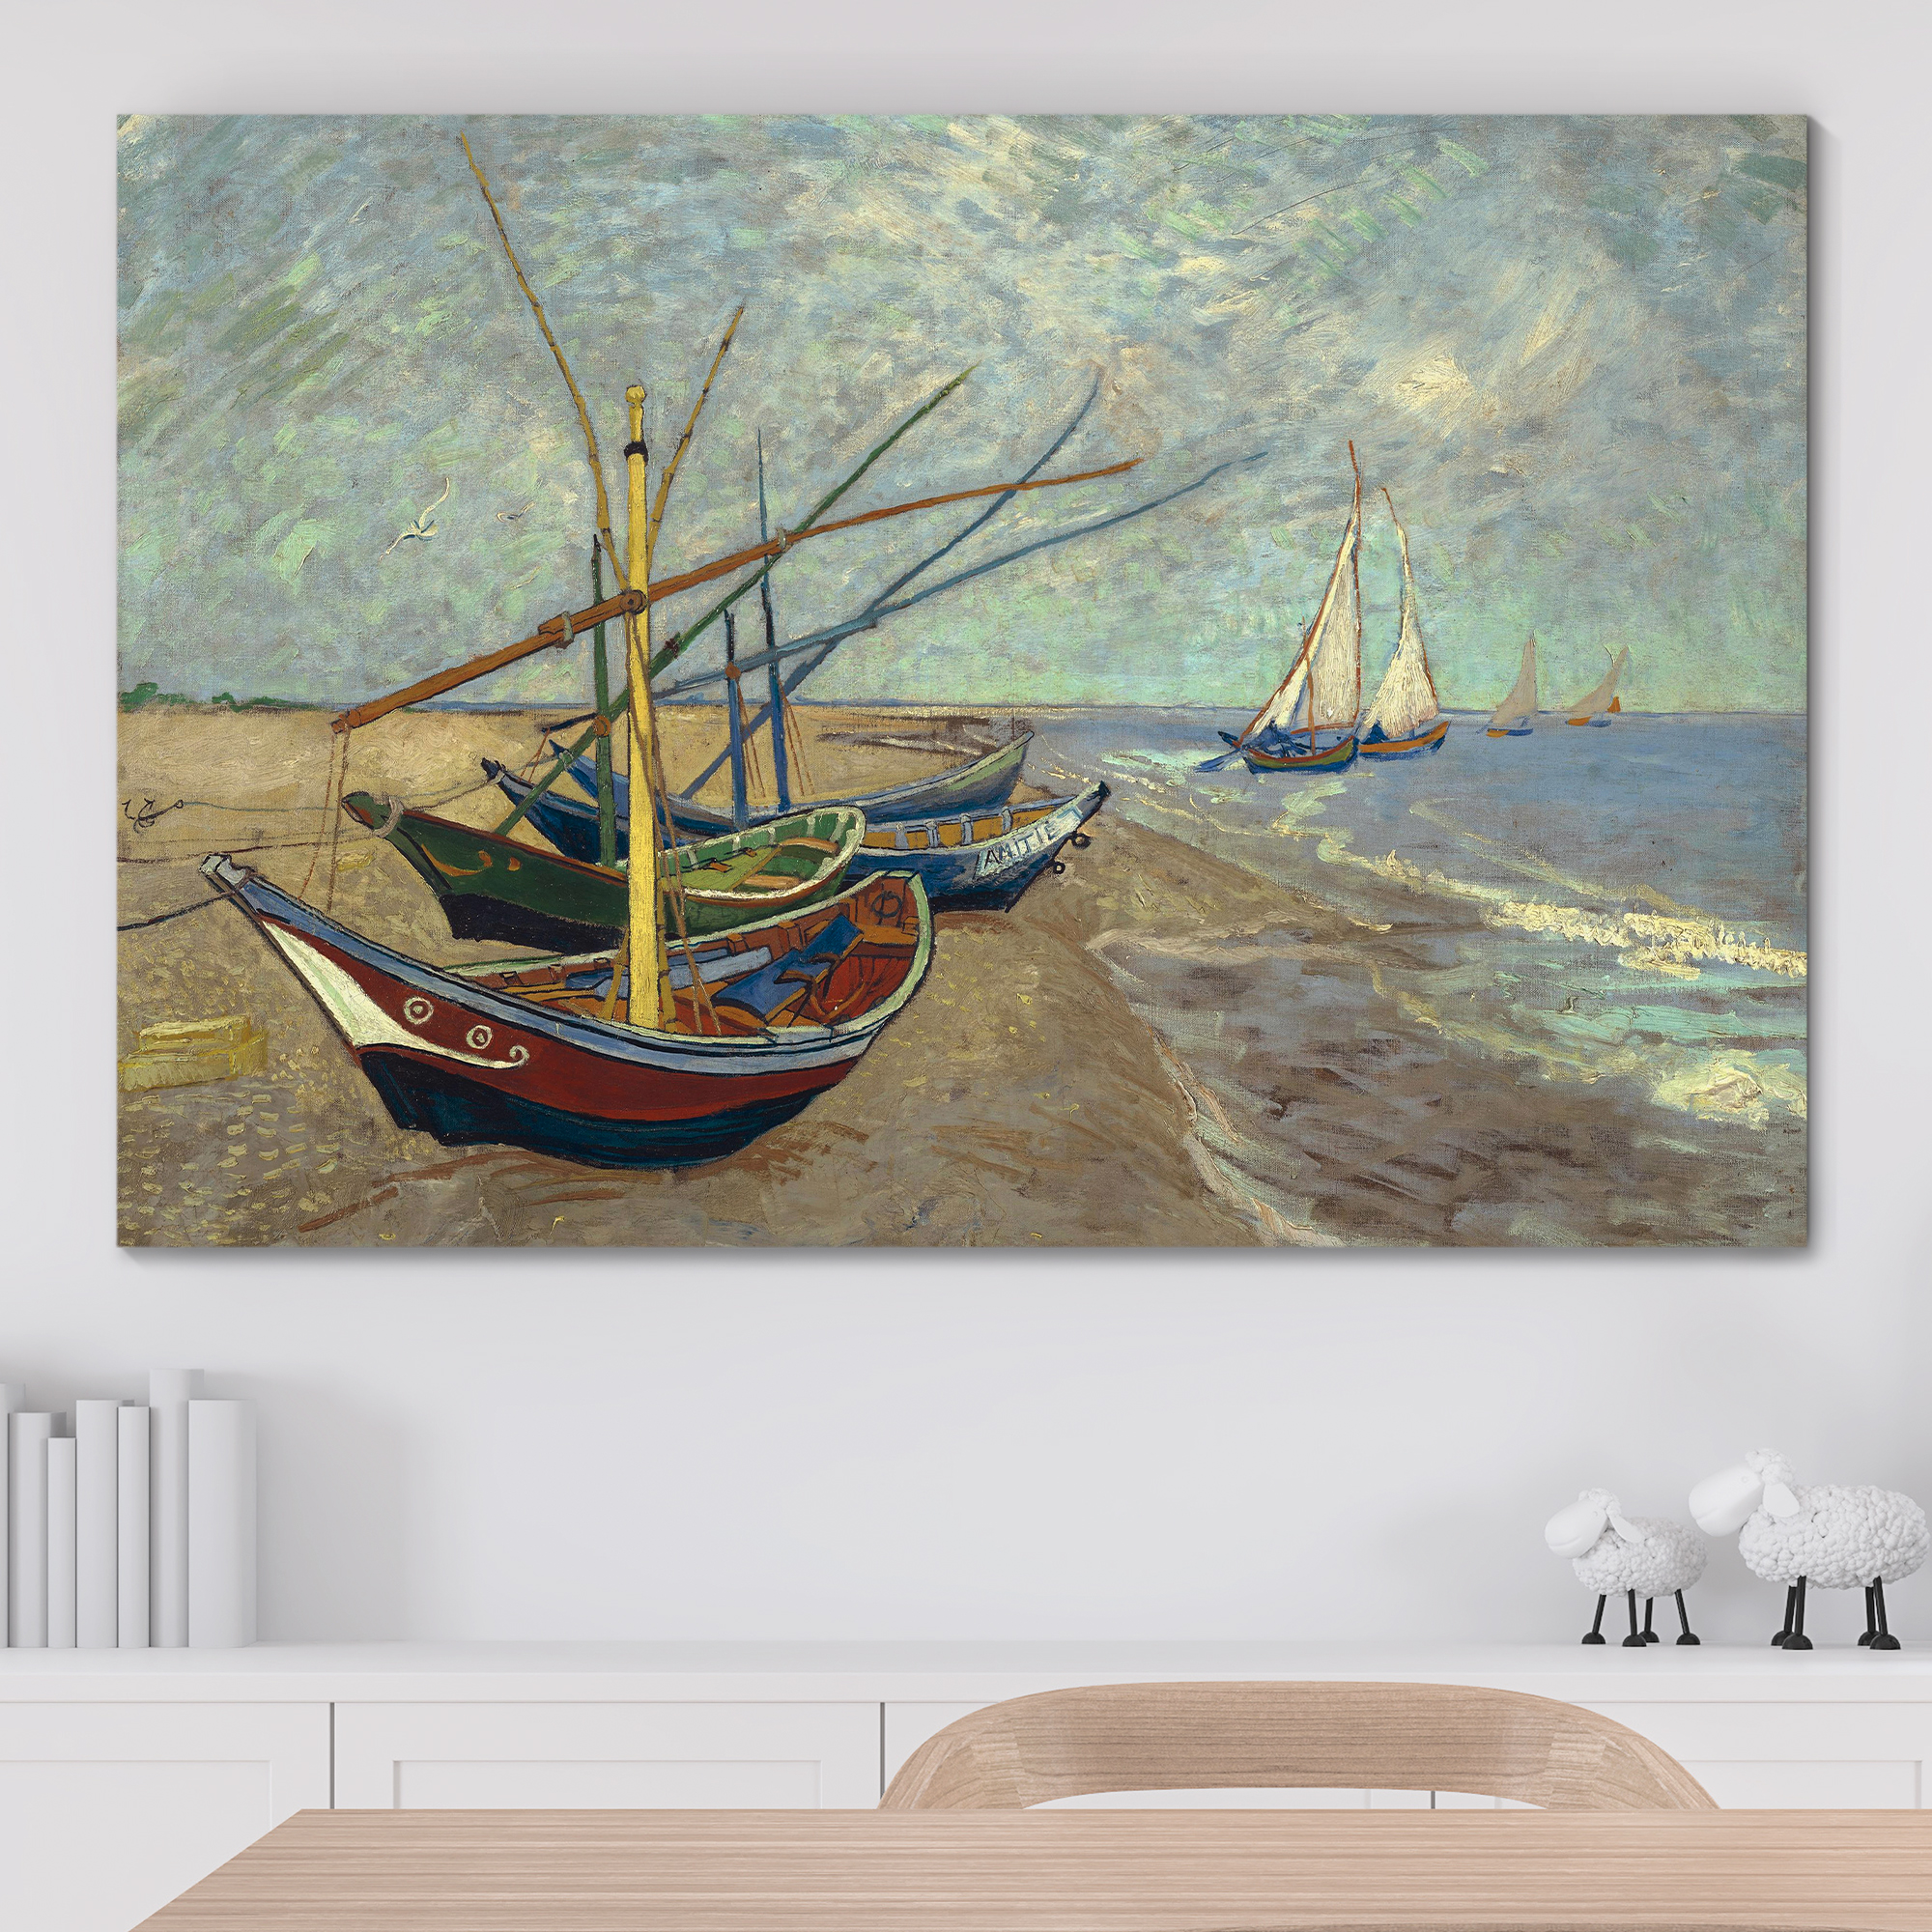 Fishing Boats on the Beach at Les Saintes-Maries-de-la-Mer by Vincent Van Gogh - Oil Painting Reproduction on Canvas Prints Wall Art, Ready to Hang - 32